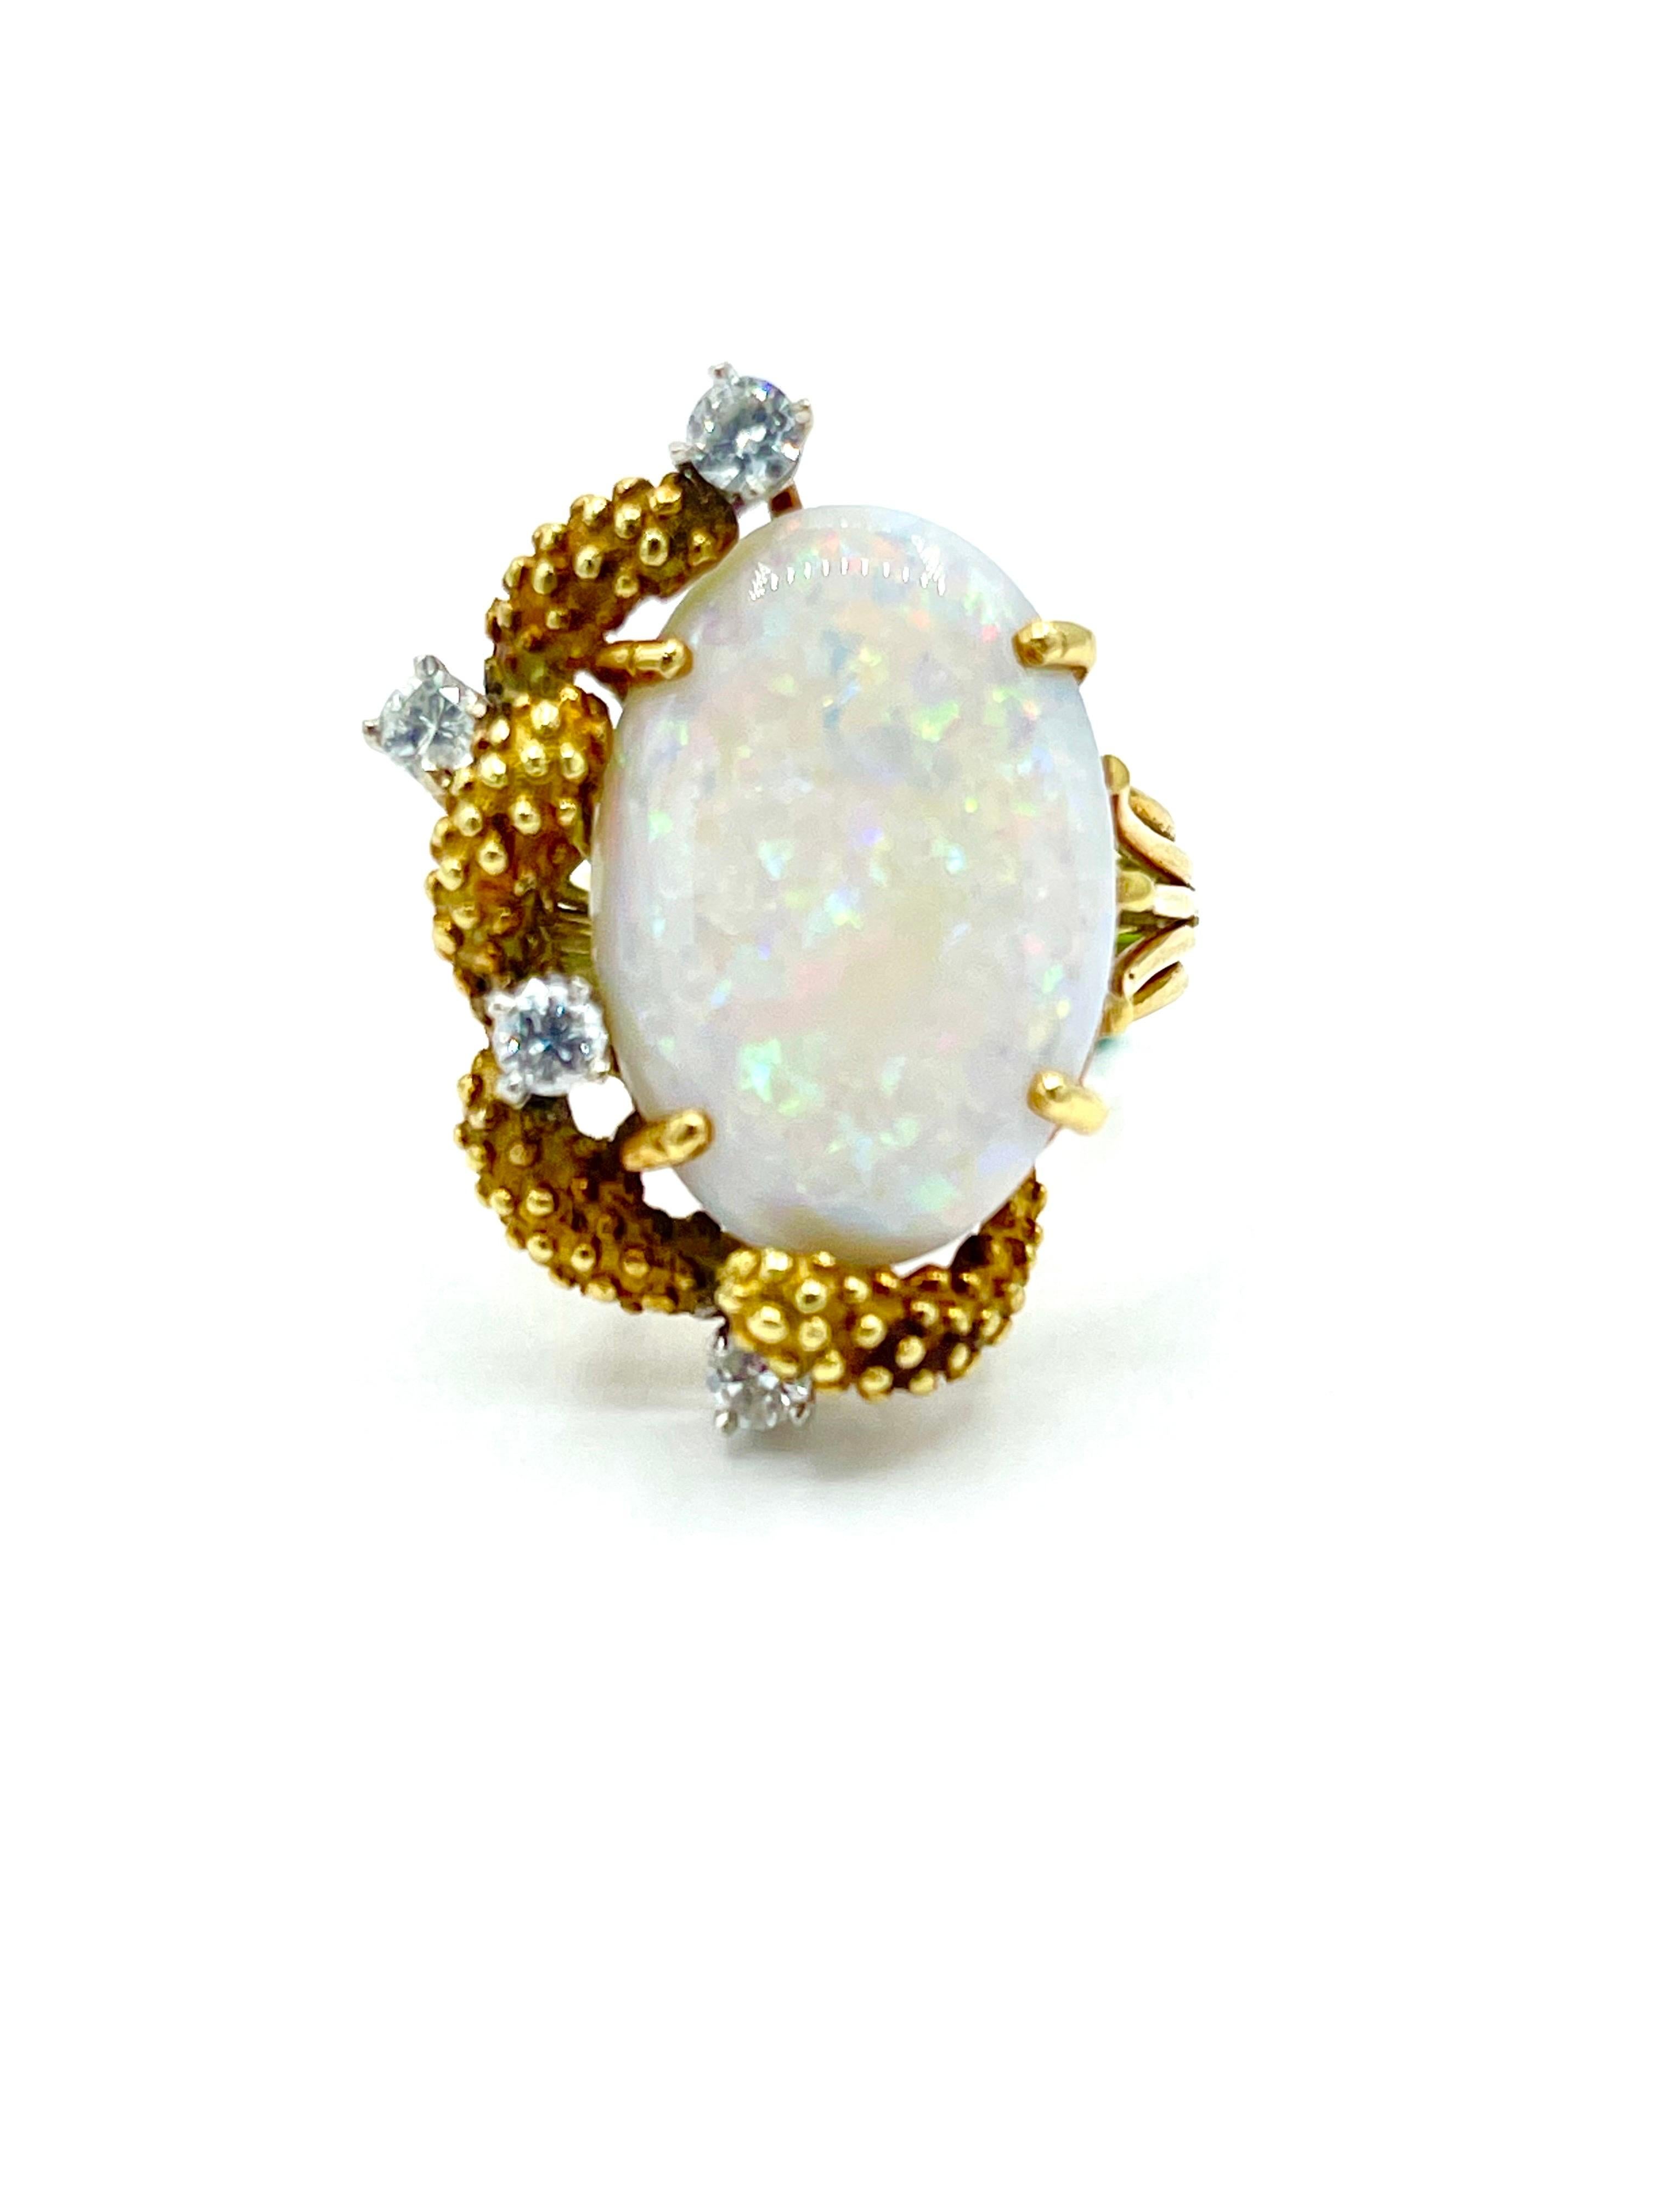 An amazing white Opal cocktail ring!  The Opal is set in four prongs, with four round brilliant Diamonds and textured 18k yellow gold to one side.  The four Diamonds have a total weight of 0.46 carats, and are graded as G-H color, SI clarity.   The